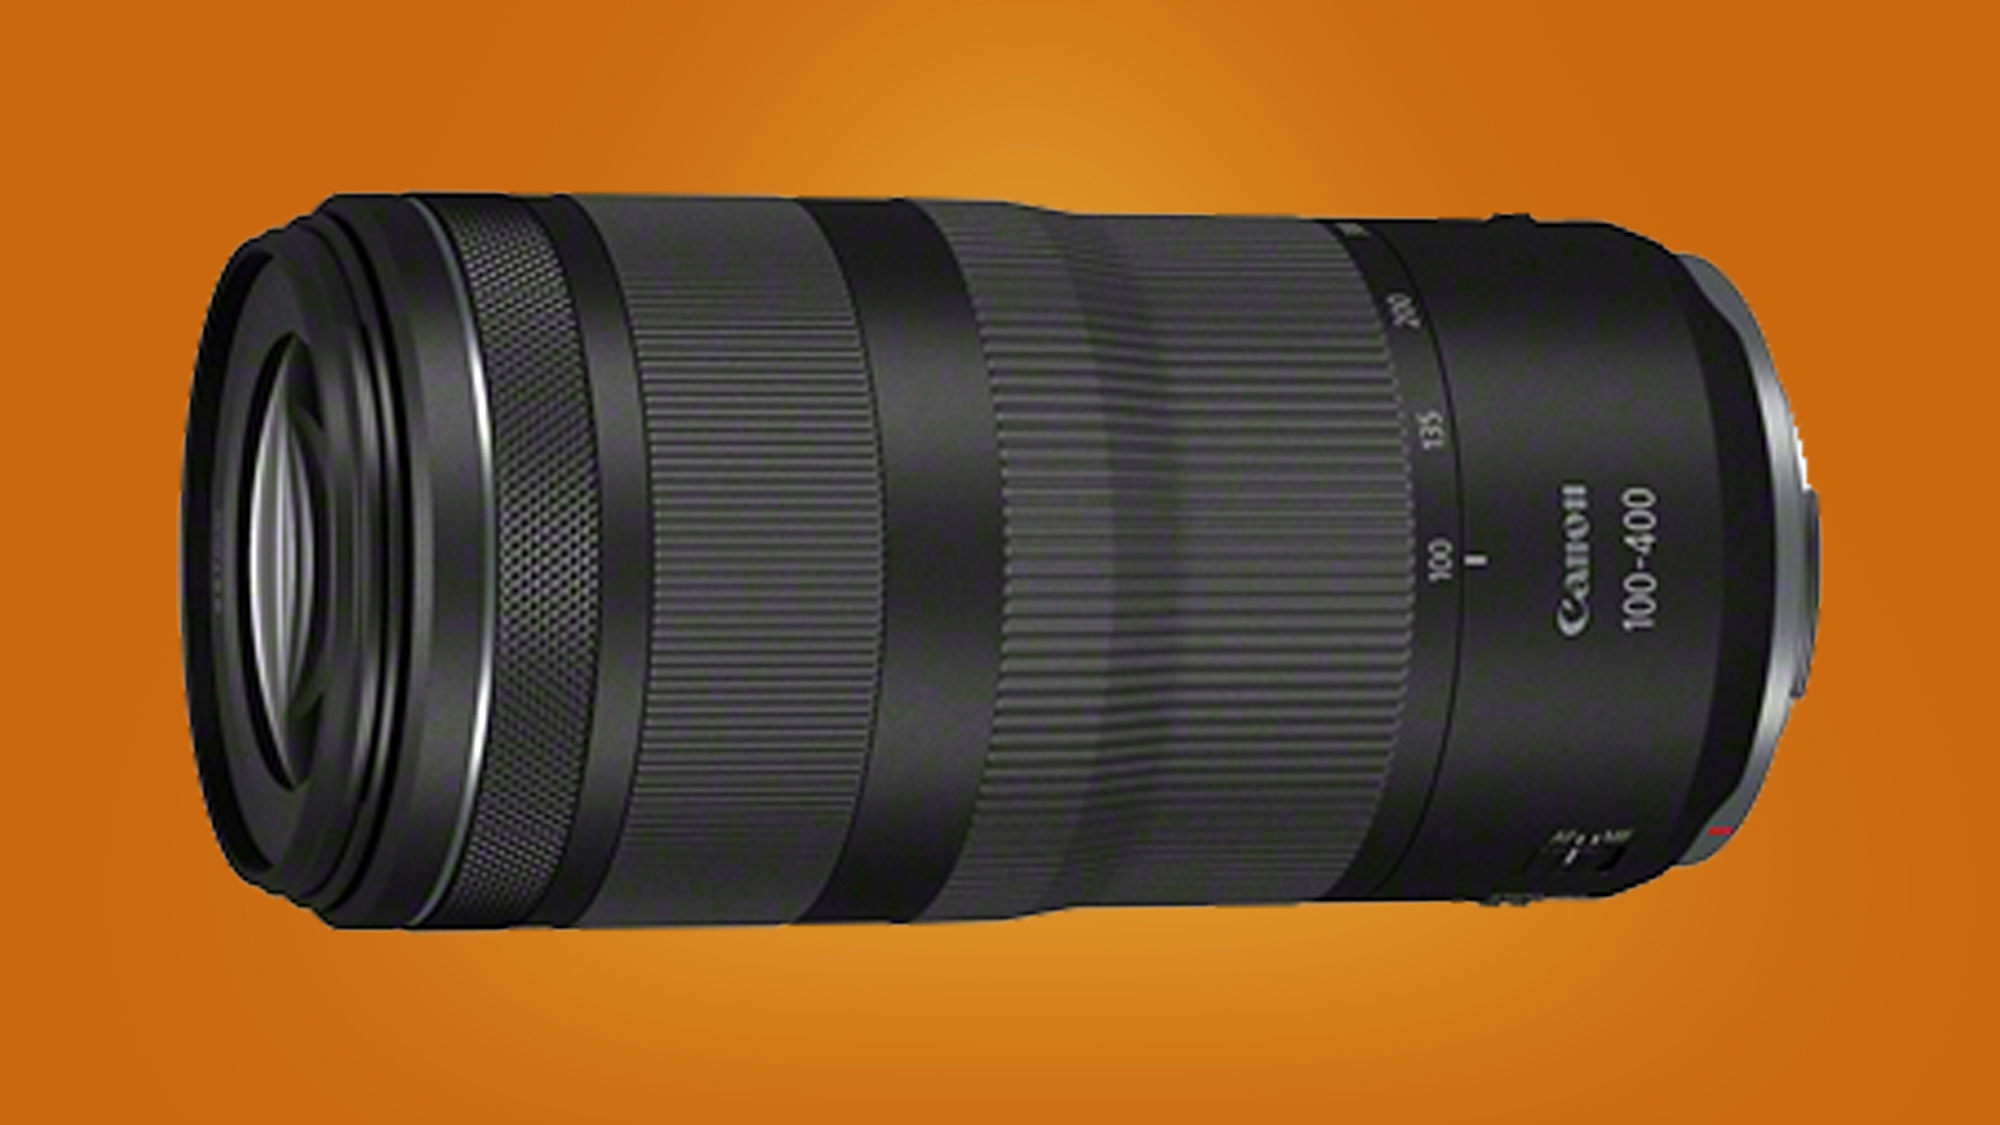 The RF 100-400mm F5.6-8 IS USM on an orange background